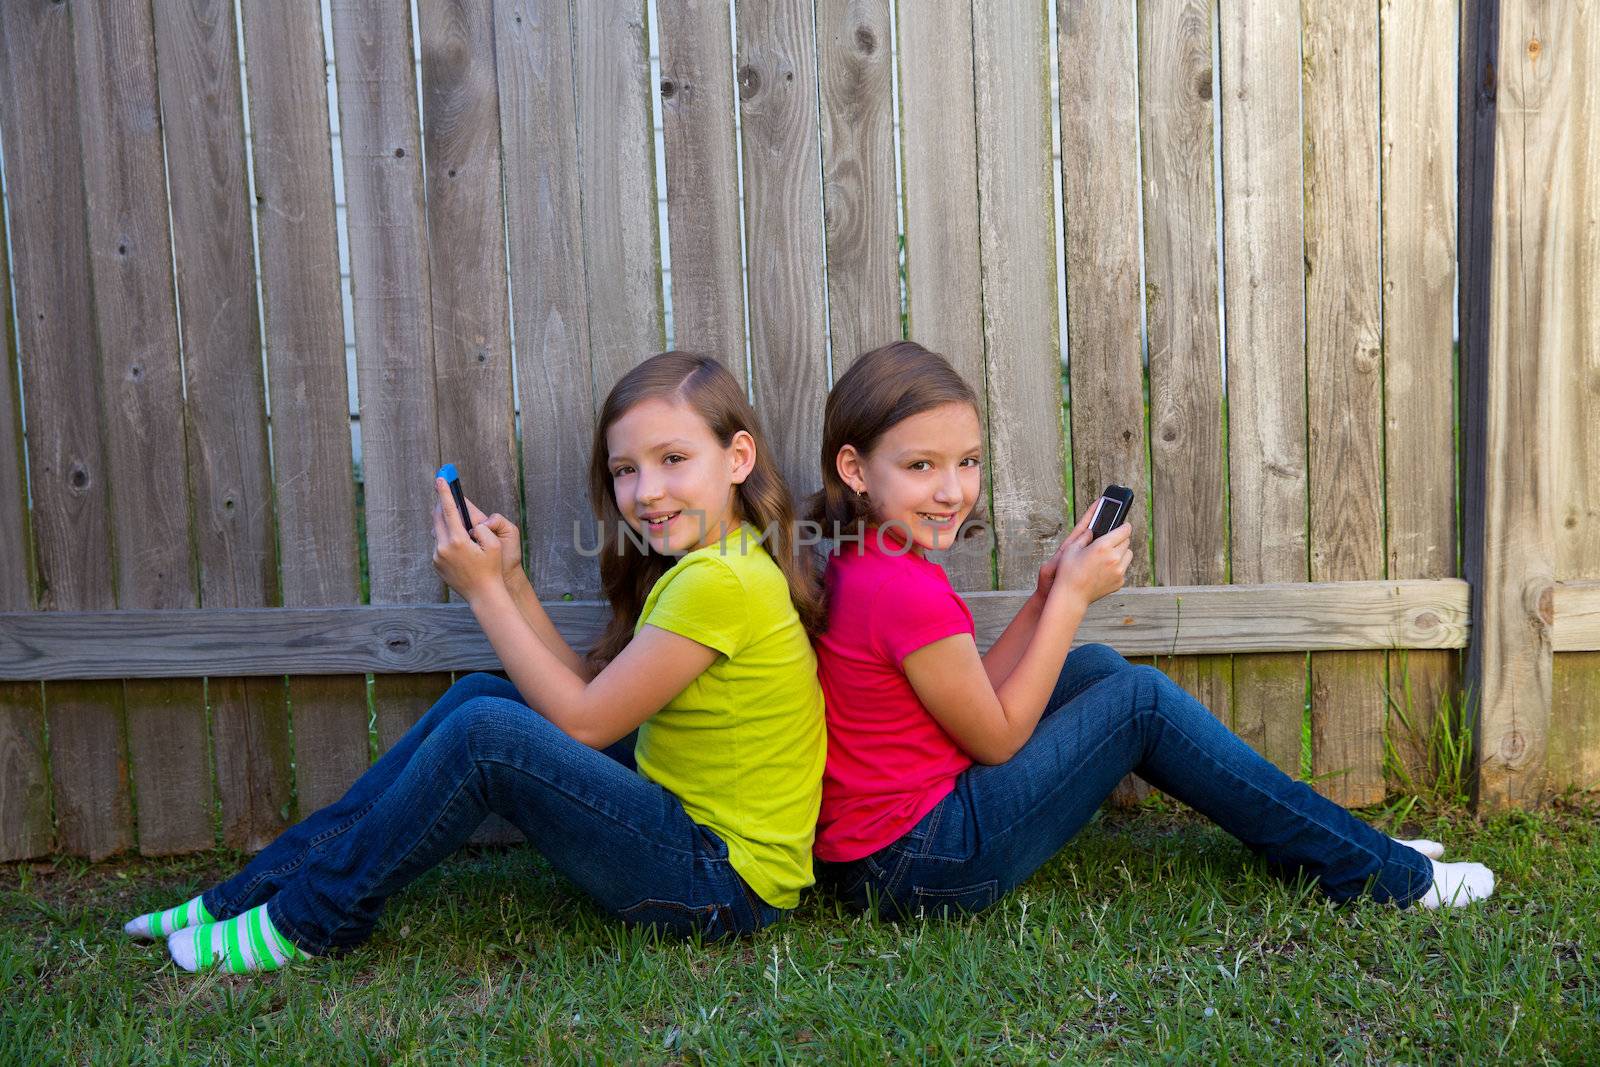 Twin sister girls playing with smartphone sitting on backyard lawn fence leaning on her back